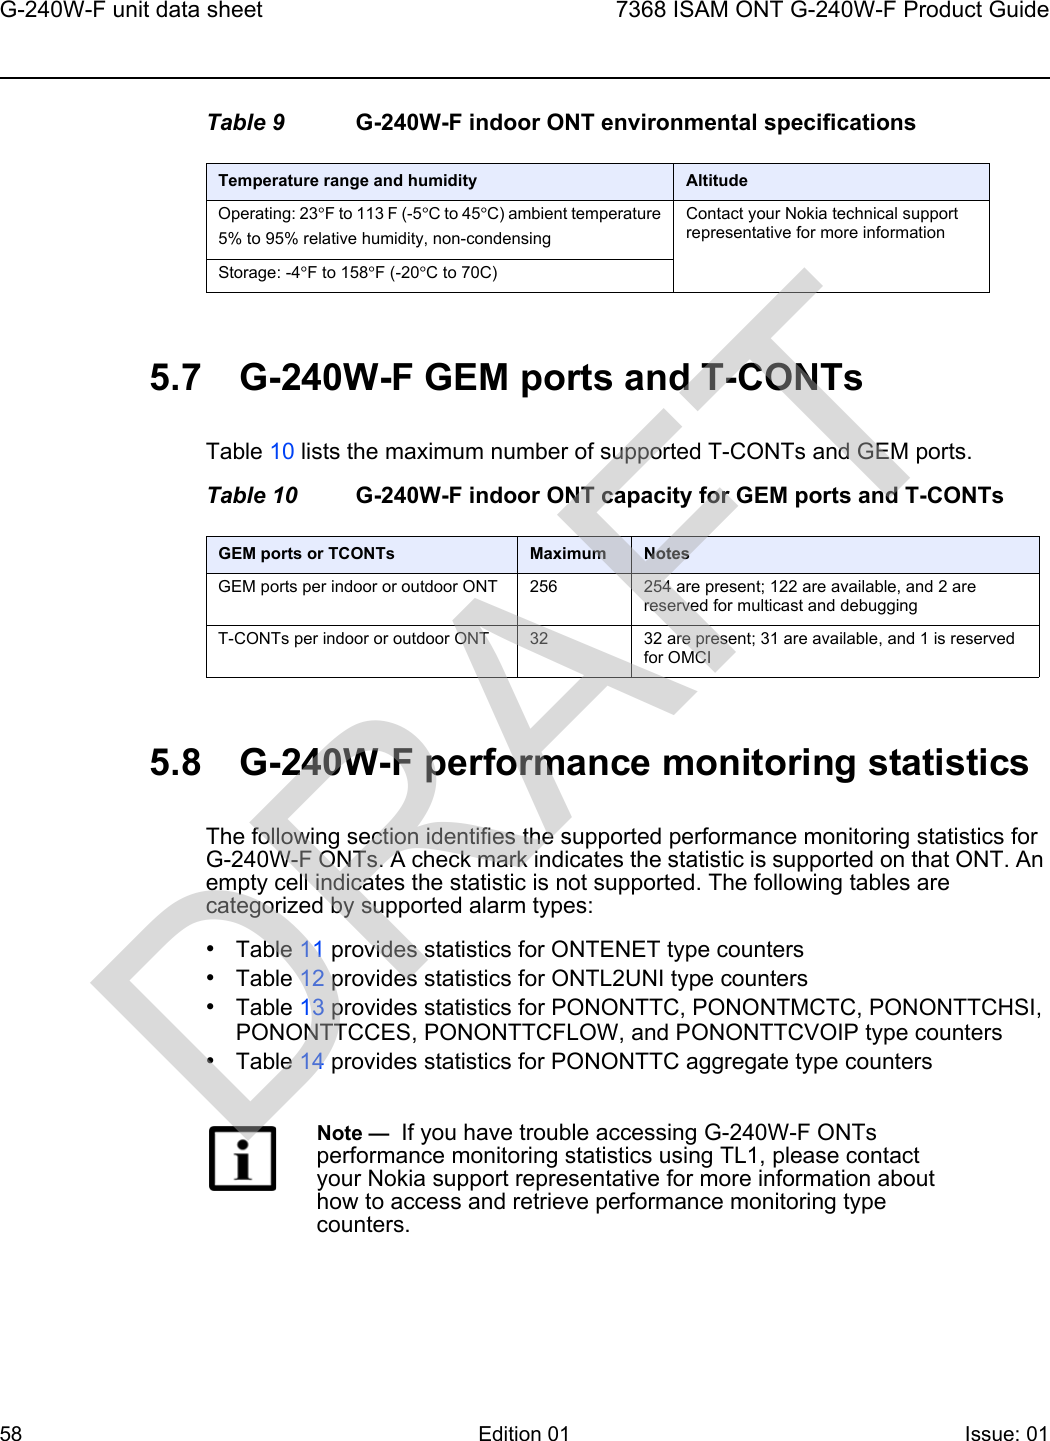 G-240W-F unit data sheet587368 ISAM ONT G-240W-F Product GuideEdition 01 Issue: 01 Table 9 G-240W-F indoor ONT environmental specifications5.7 G-240W-F GEM ports and T-CONTsTable 10 lists the maximum number of supported T-CONTs and GEM ports.Table 10 G-240W-F indoor ONT capacity for GEM ports and T-CONTs5.8 G-240W-F performance monitoring statisticsThe following section identifies the supported performance monitoring statistics for G-240W-F ONTs. A check mark indicates the statistic is supported on that ONT. An empty cell indicates the statistic is not supported. The following tables are categorized by supported alarm types:•Table 11 provides statistics for ONTENET type counters•Table 12 provides statistics for ONTL2UNI type counters•Table 13 provides statistics for PONONTTC, PONONTMCTC, PONONTTCHSI, PONONTTCCES, PONONTTCFLOW, and PONONTTCVOIP type counters•Table 14 provides statistics for PONONTTC aggregate type countersTemperature range and humidity AltitudeOperating: 23°F to 113 F (-5°C to 45°C) ambient temperature5% to 95% relative humidity, non-condensingContact your Nokia technical support representative for more informationStorage: -4°F to 158°F (-20°C to 70C)GEM ports or TCONTs Maximum NotesGEM ports per indoor or outdoor ONT 256 254 are present; 122 are available, and 2 are reserved for multicast and debuggingT-CONTs per indoor or outdoor ONT 32 32 are present; 31 are available, and 1 is reserved for OMCINote —  If you have trouble accessing G-240W-F ONTs performance monitoring statistics using TL1, please contact your Nokia support representative for more information about how to access and retrieve performance monitoring type counters.DRAFT